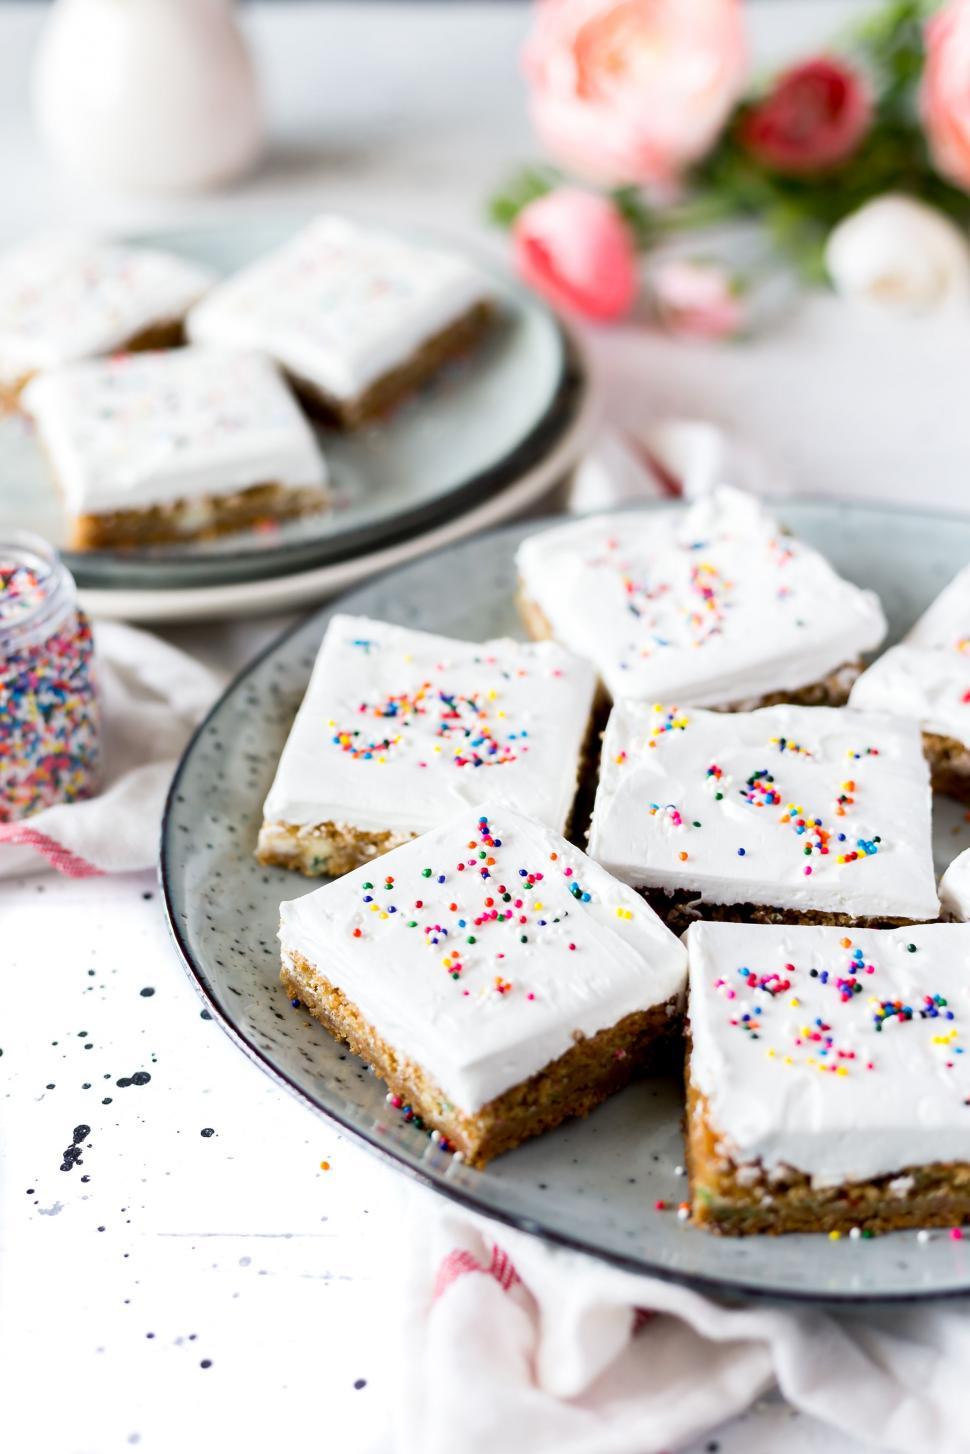 Free Image of Plate of Cake With White Frosting and Sprinkles 